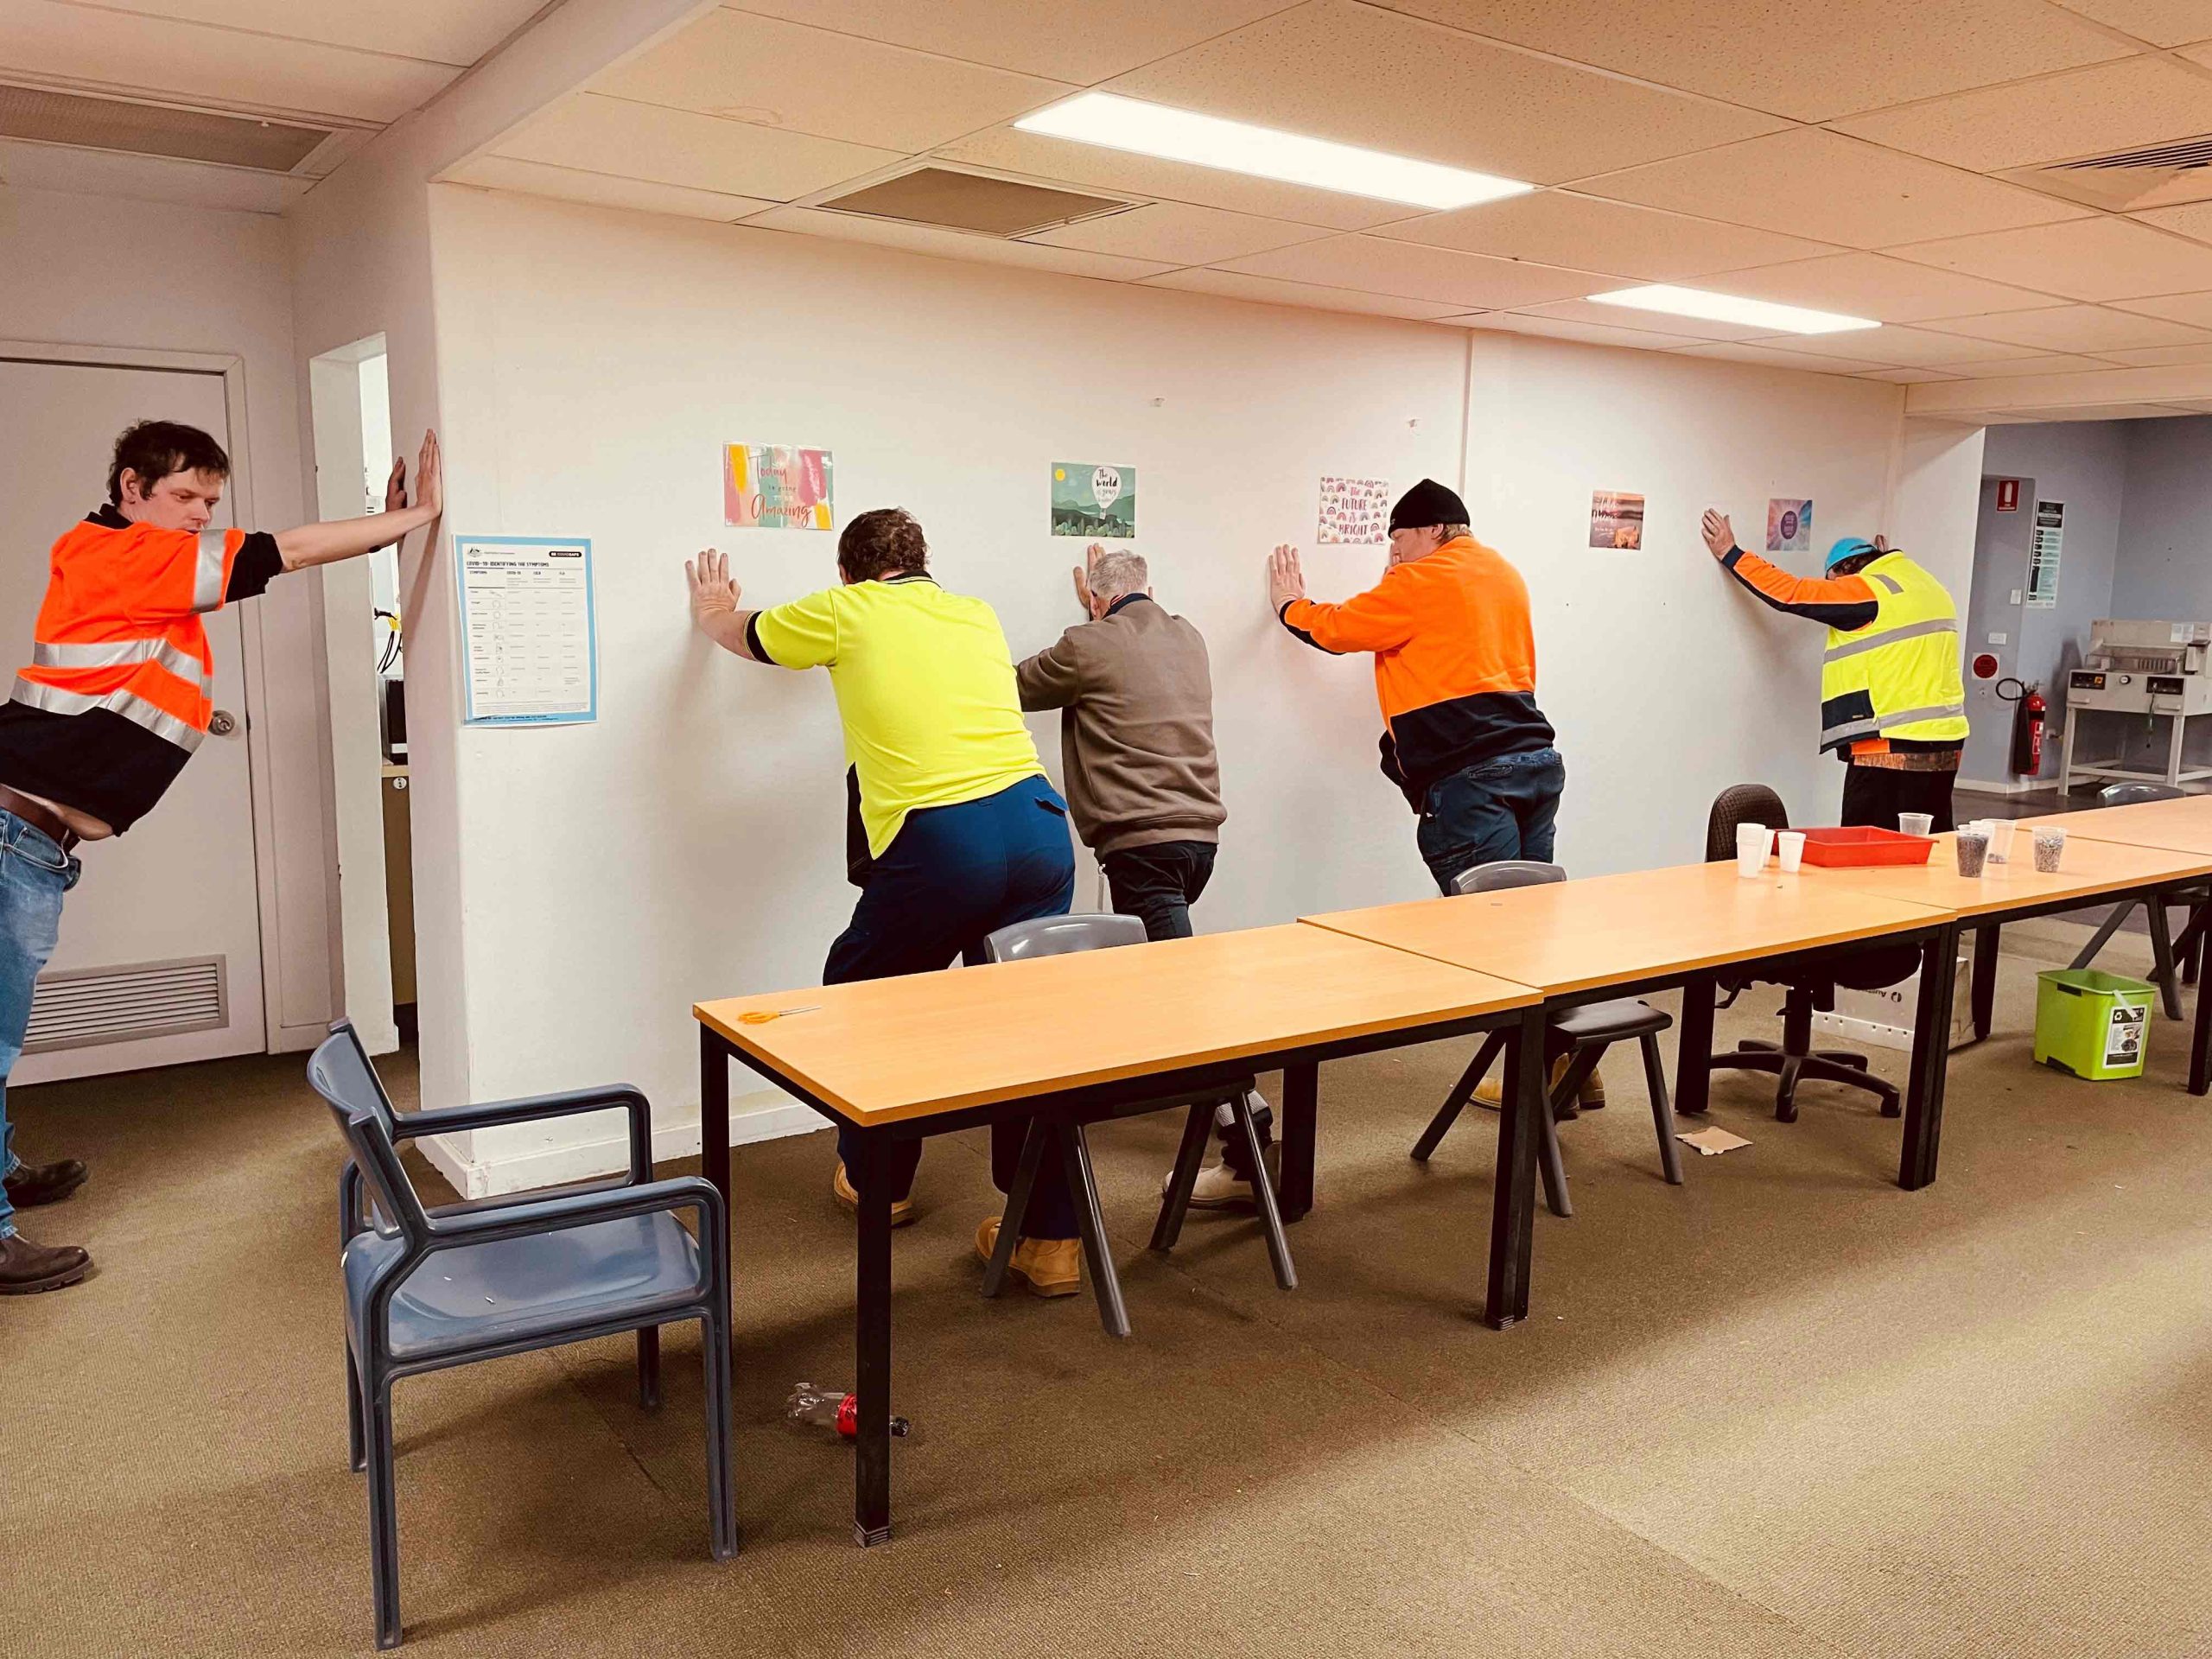 A line of men in high-vis stretching against a wall.